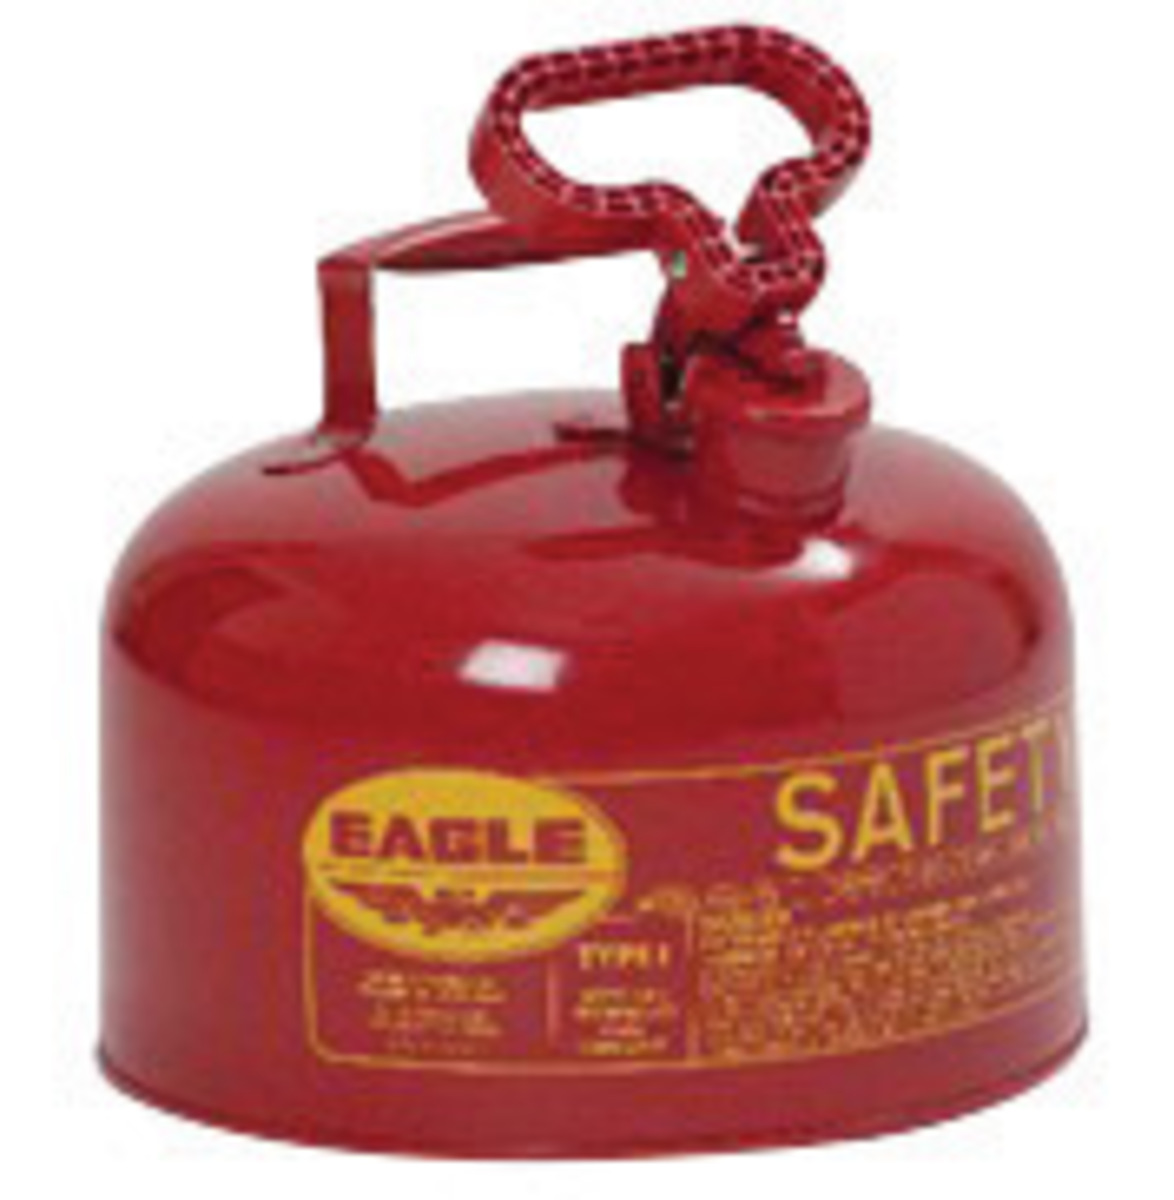 Eagle 2 1/2 Gallon Red 24 Gauge Galvanized Steel Type I Safety Can With Non-Sparking Flame Arrestor